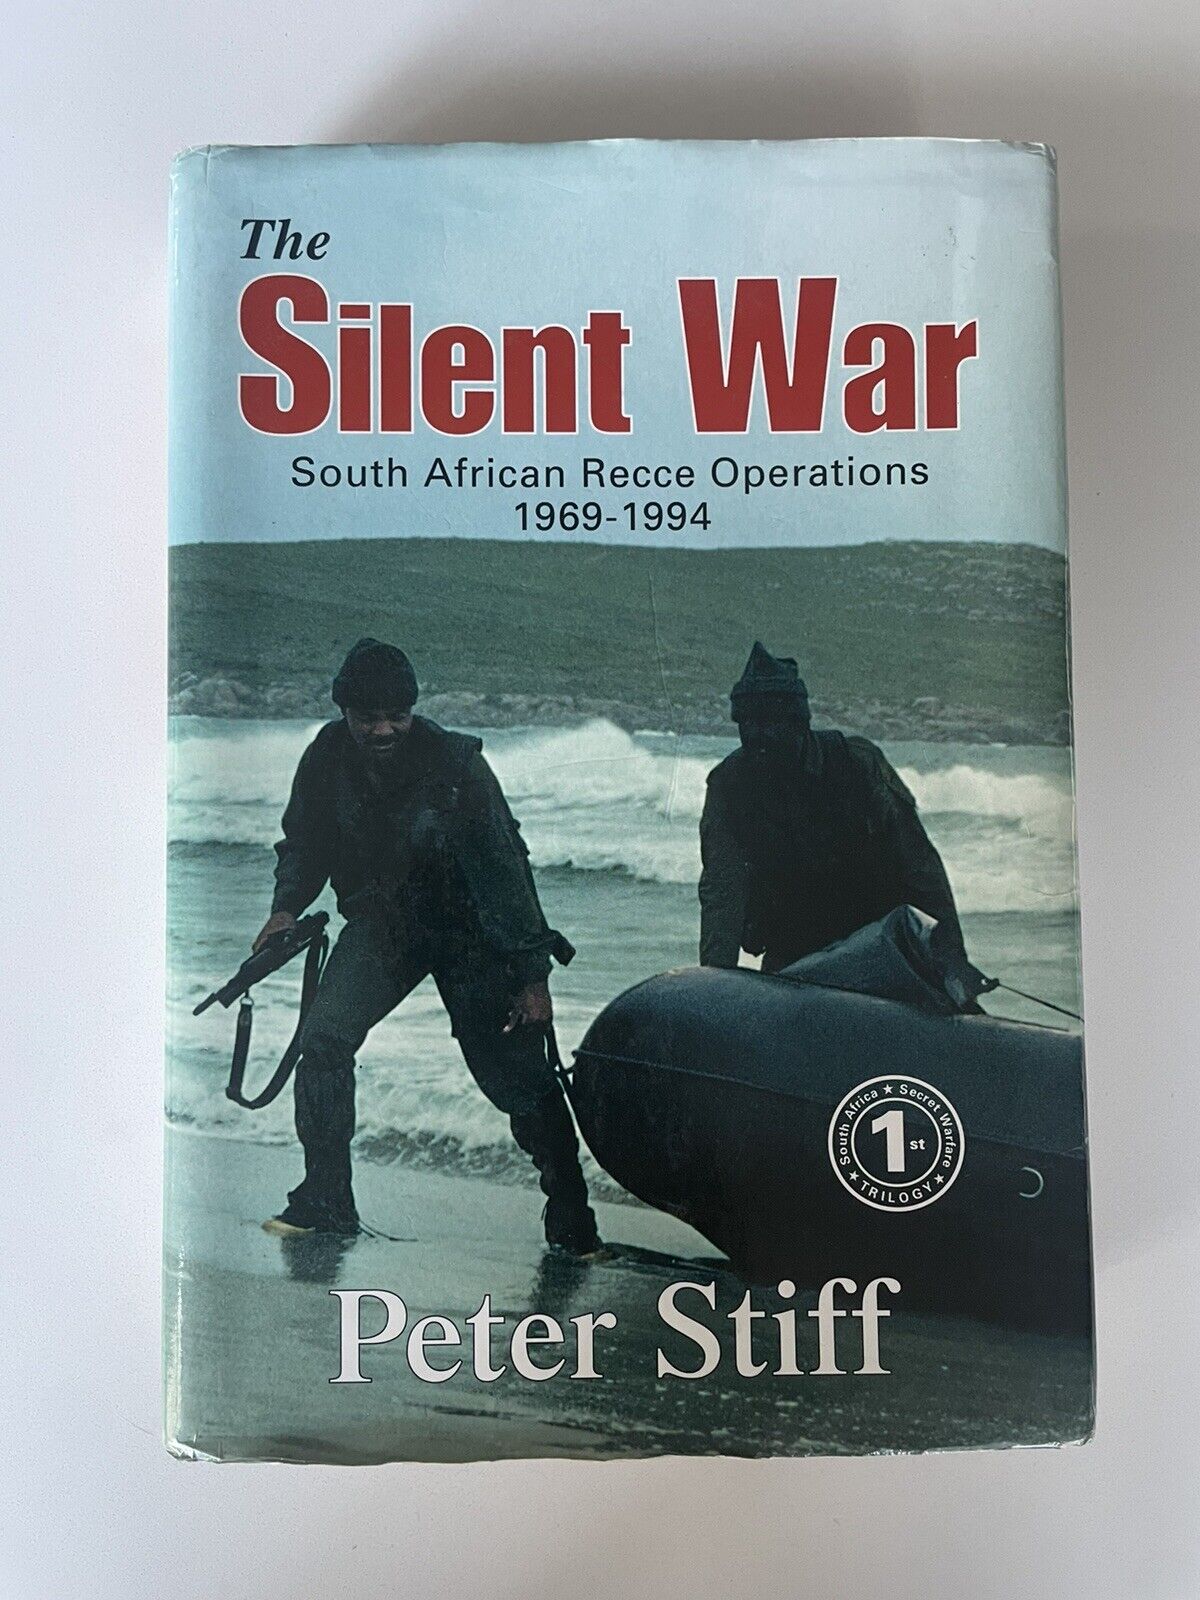 The Silent War by Peter Stiff, South Africa 1st Edition Hardcover